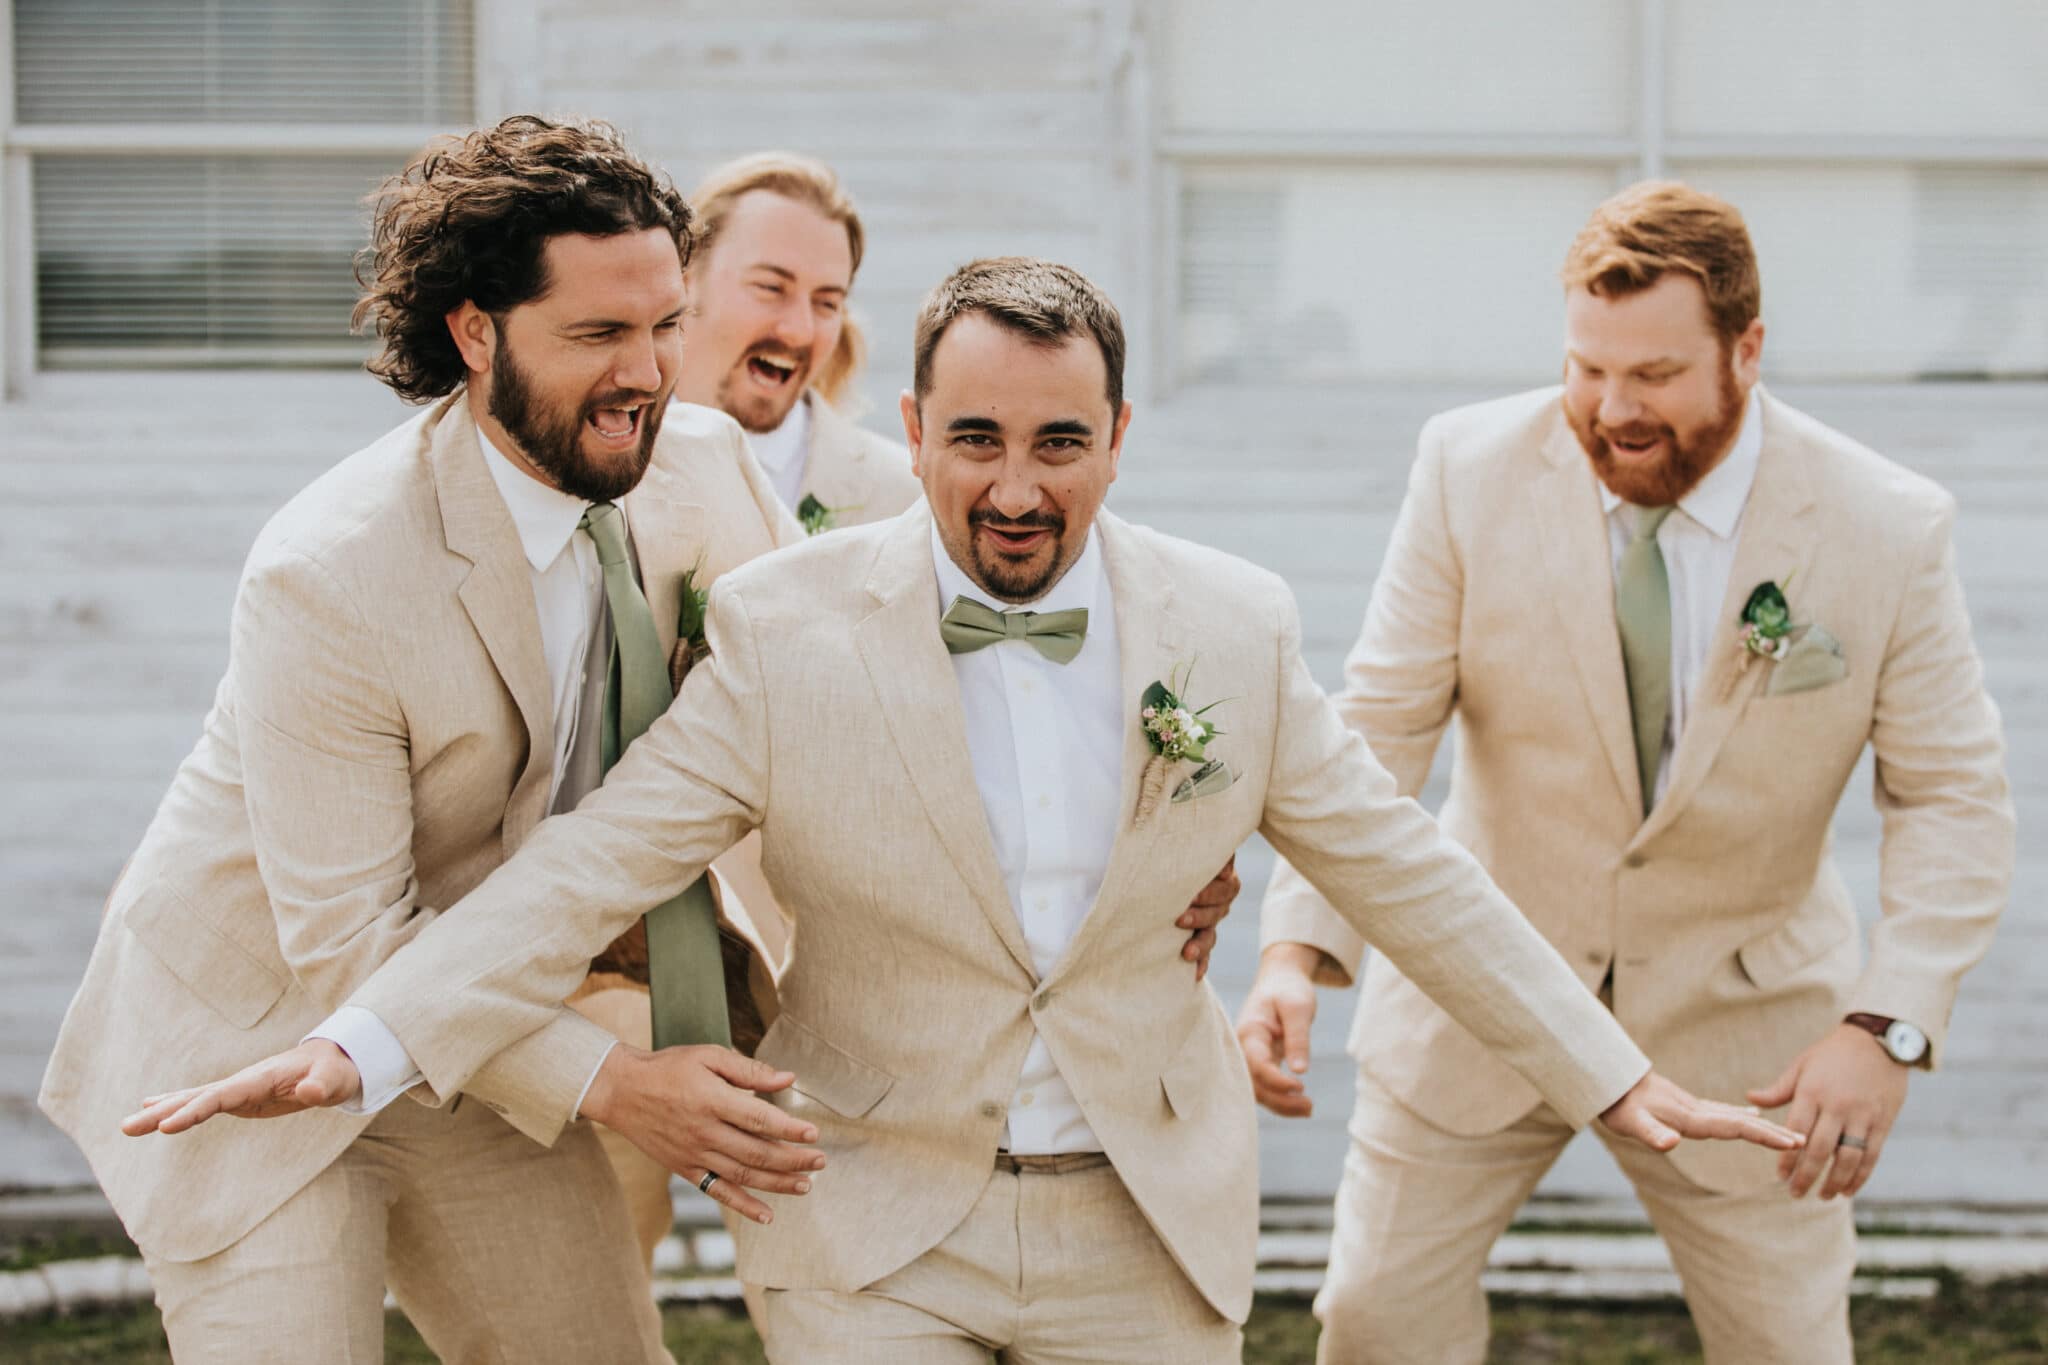 the groom and groomsmen in their wedding attire for the classic barn wedding.